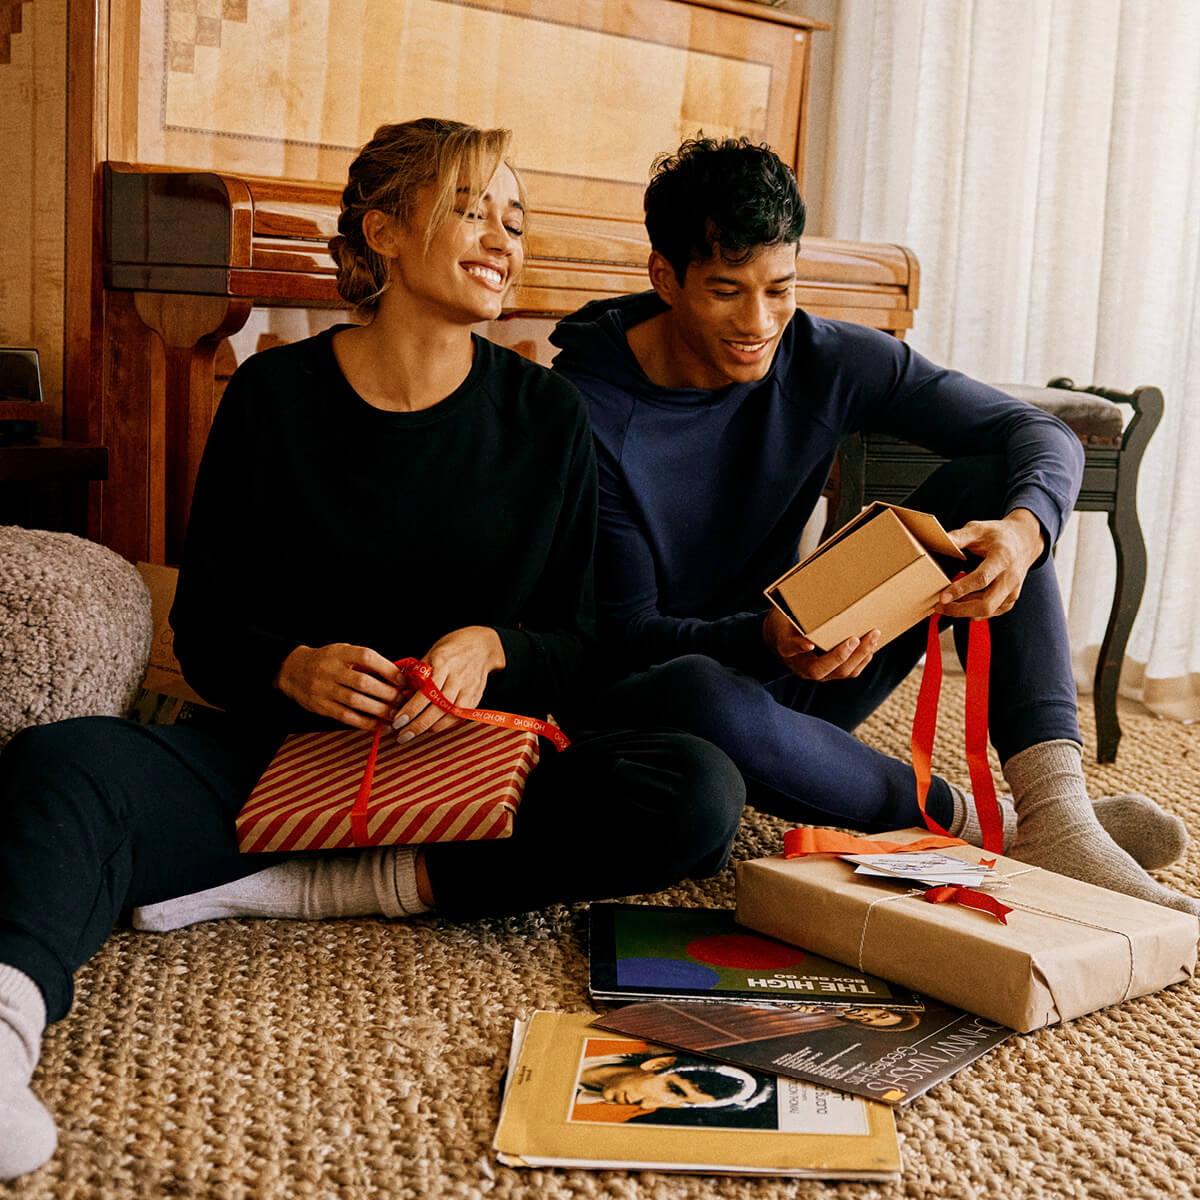 This holiday season, gift your loved ones well-being for their wardrobe. From Luxury Lounge and sleep sets, to our most wanted pieces, gifts under 50 and ideas for her; there is something for everyone in our gift edit.